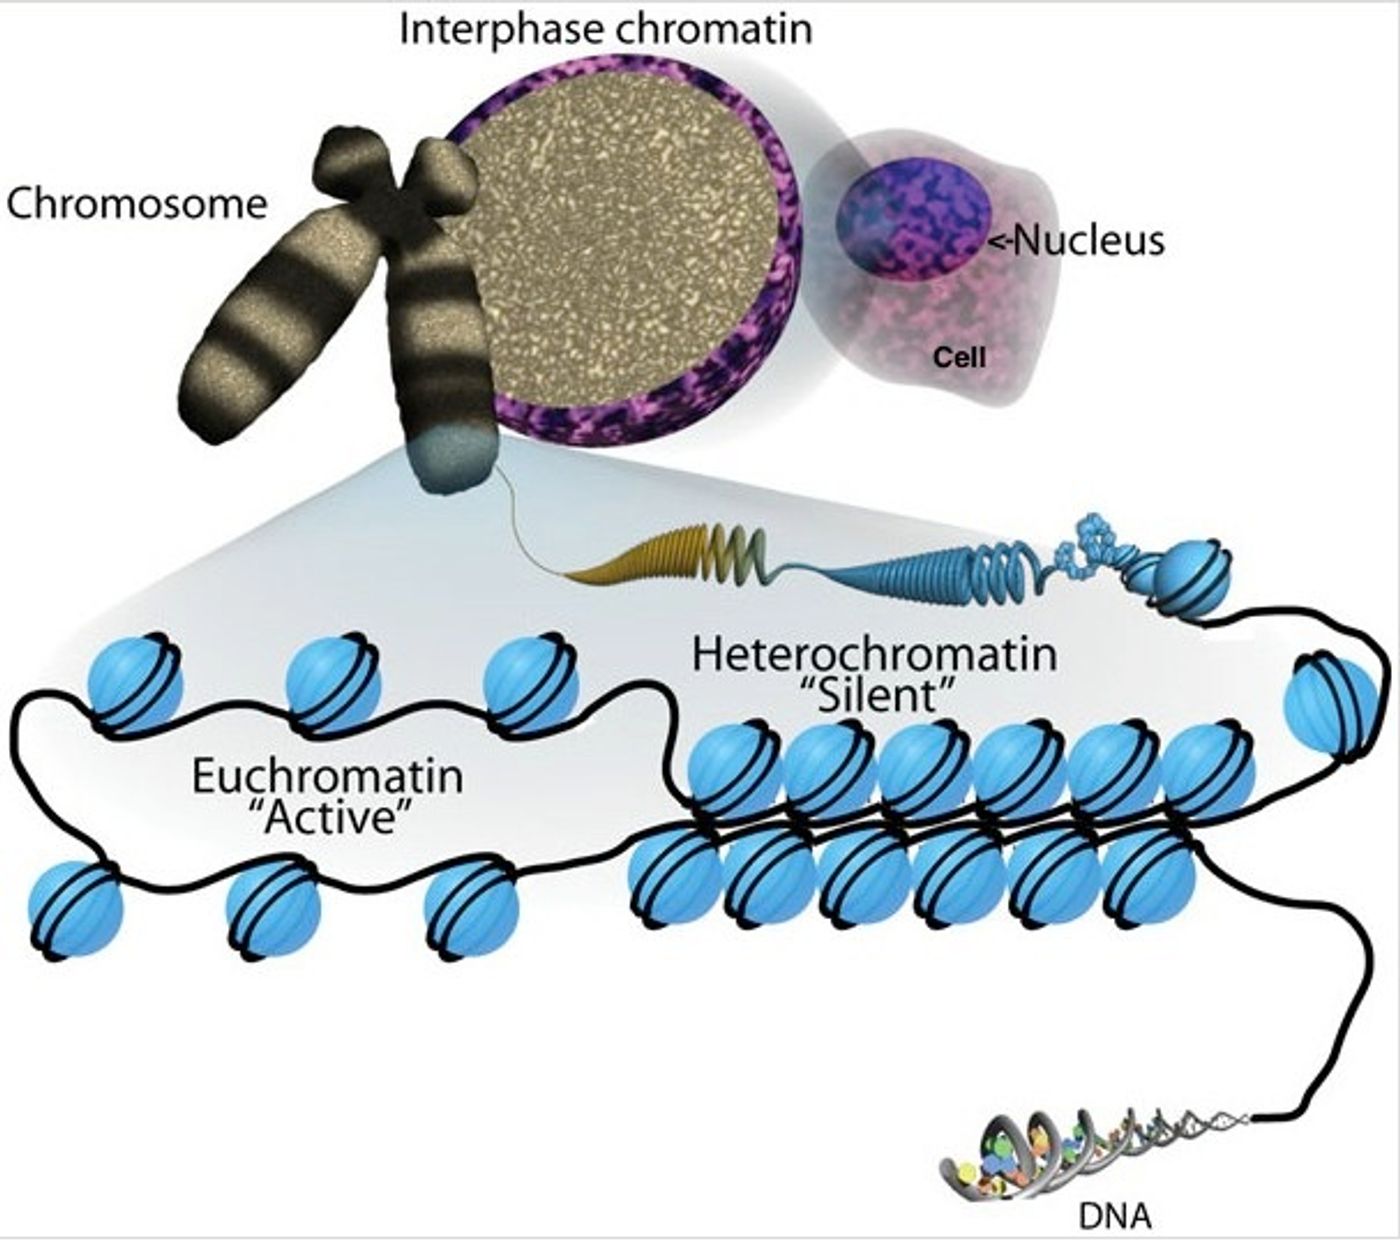 The level of organizational packing can have serious consequences on DNA-mediated processes like gene regulation. Euchromatin (loose or open chromatin) structure is permissible for transcription whereas heterochromatin (tight or closed chromatin) is more compact and inhibitory to factors that need to get access to the DNA template. By Sha, K. and Boyer, L. A., stemBook 2009